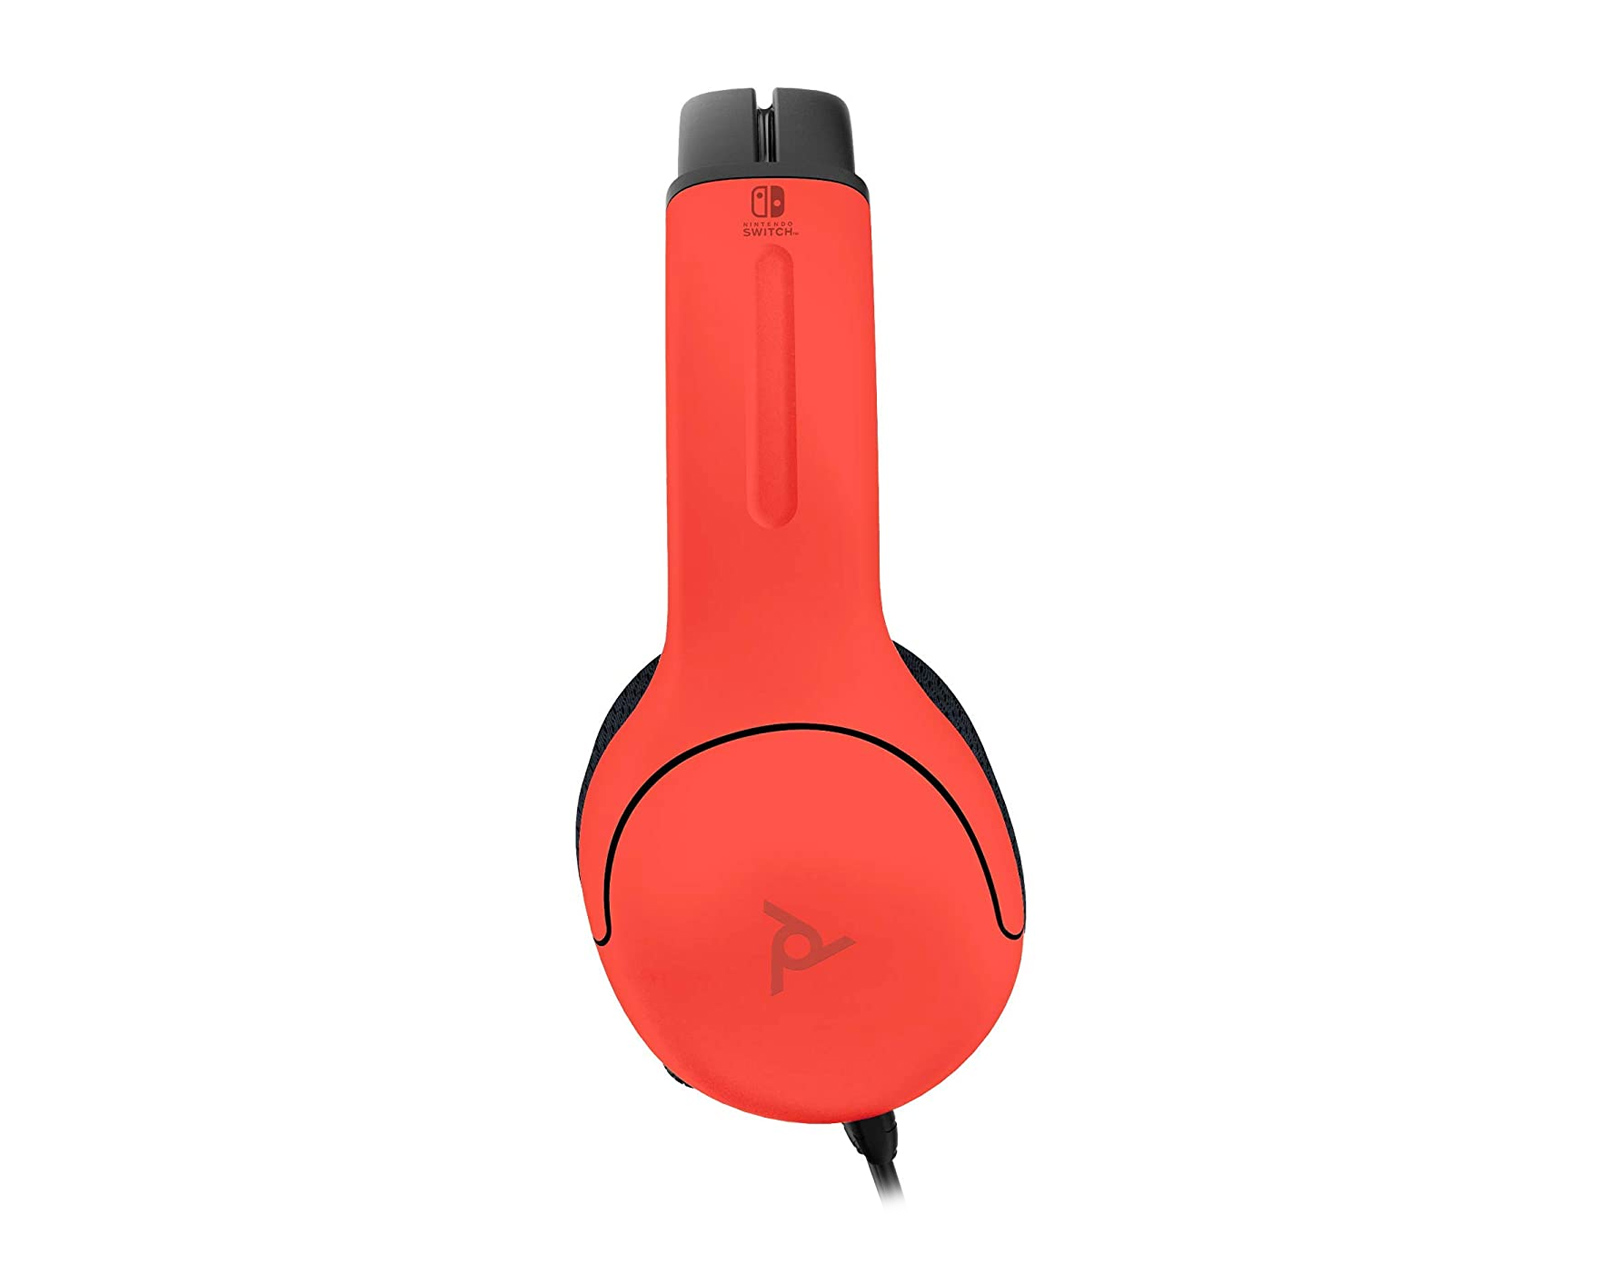 PDP LVL40 Stereo Gaming Headset (Nintendo Switch) - Red/Blue 